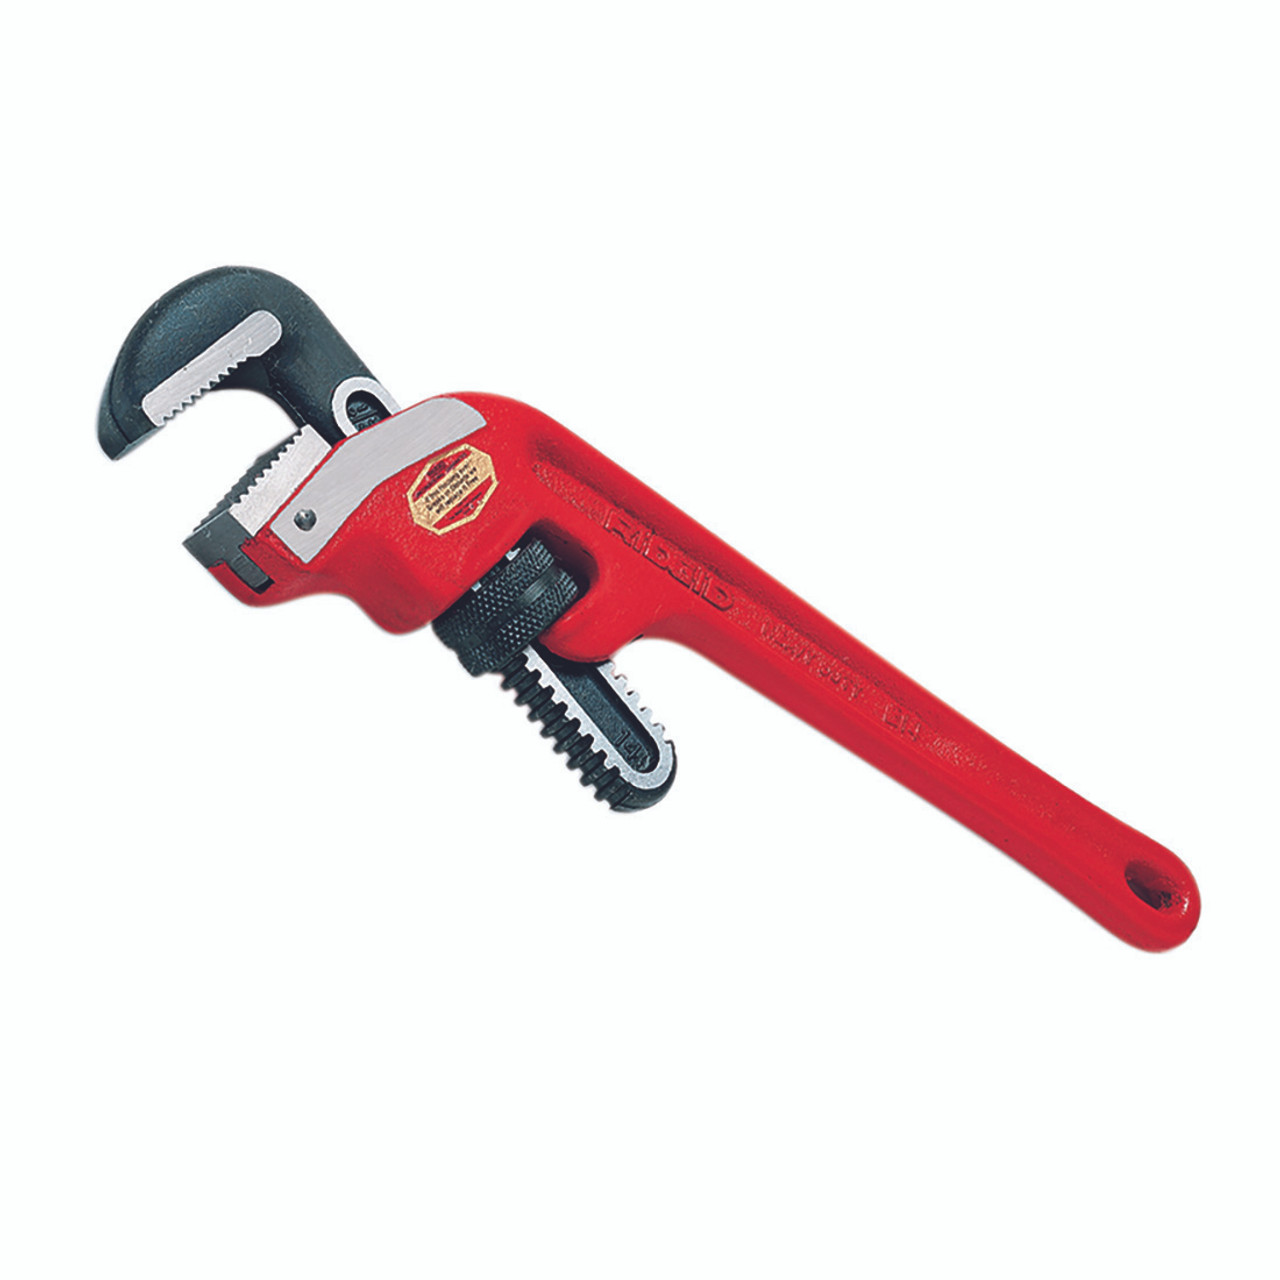 RIDGID 31070 14" End Pipe Wrench Cast Iron 2" Jaw 